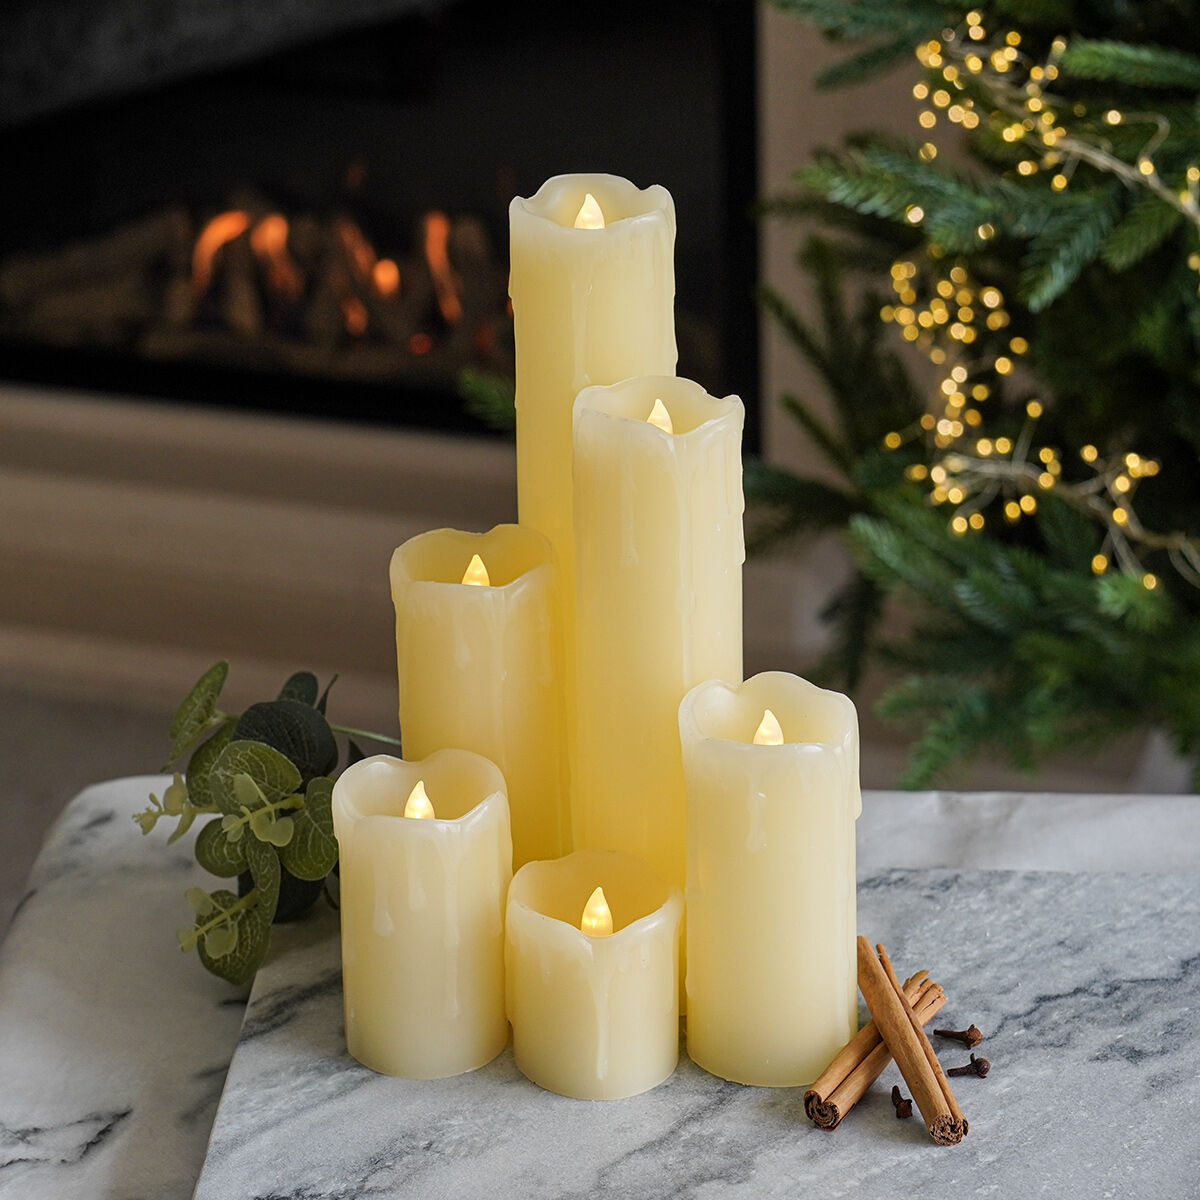 6 Battery Flickering Dripping Wax Pillar LED Candles image 2